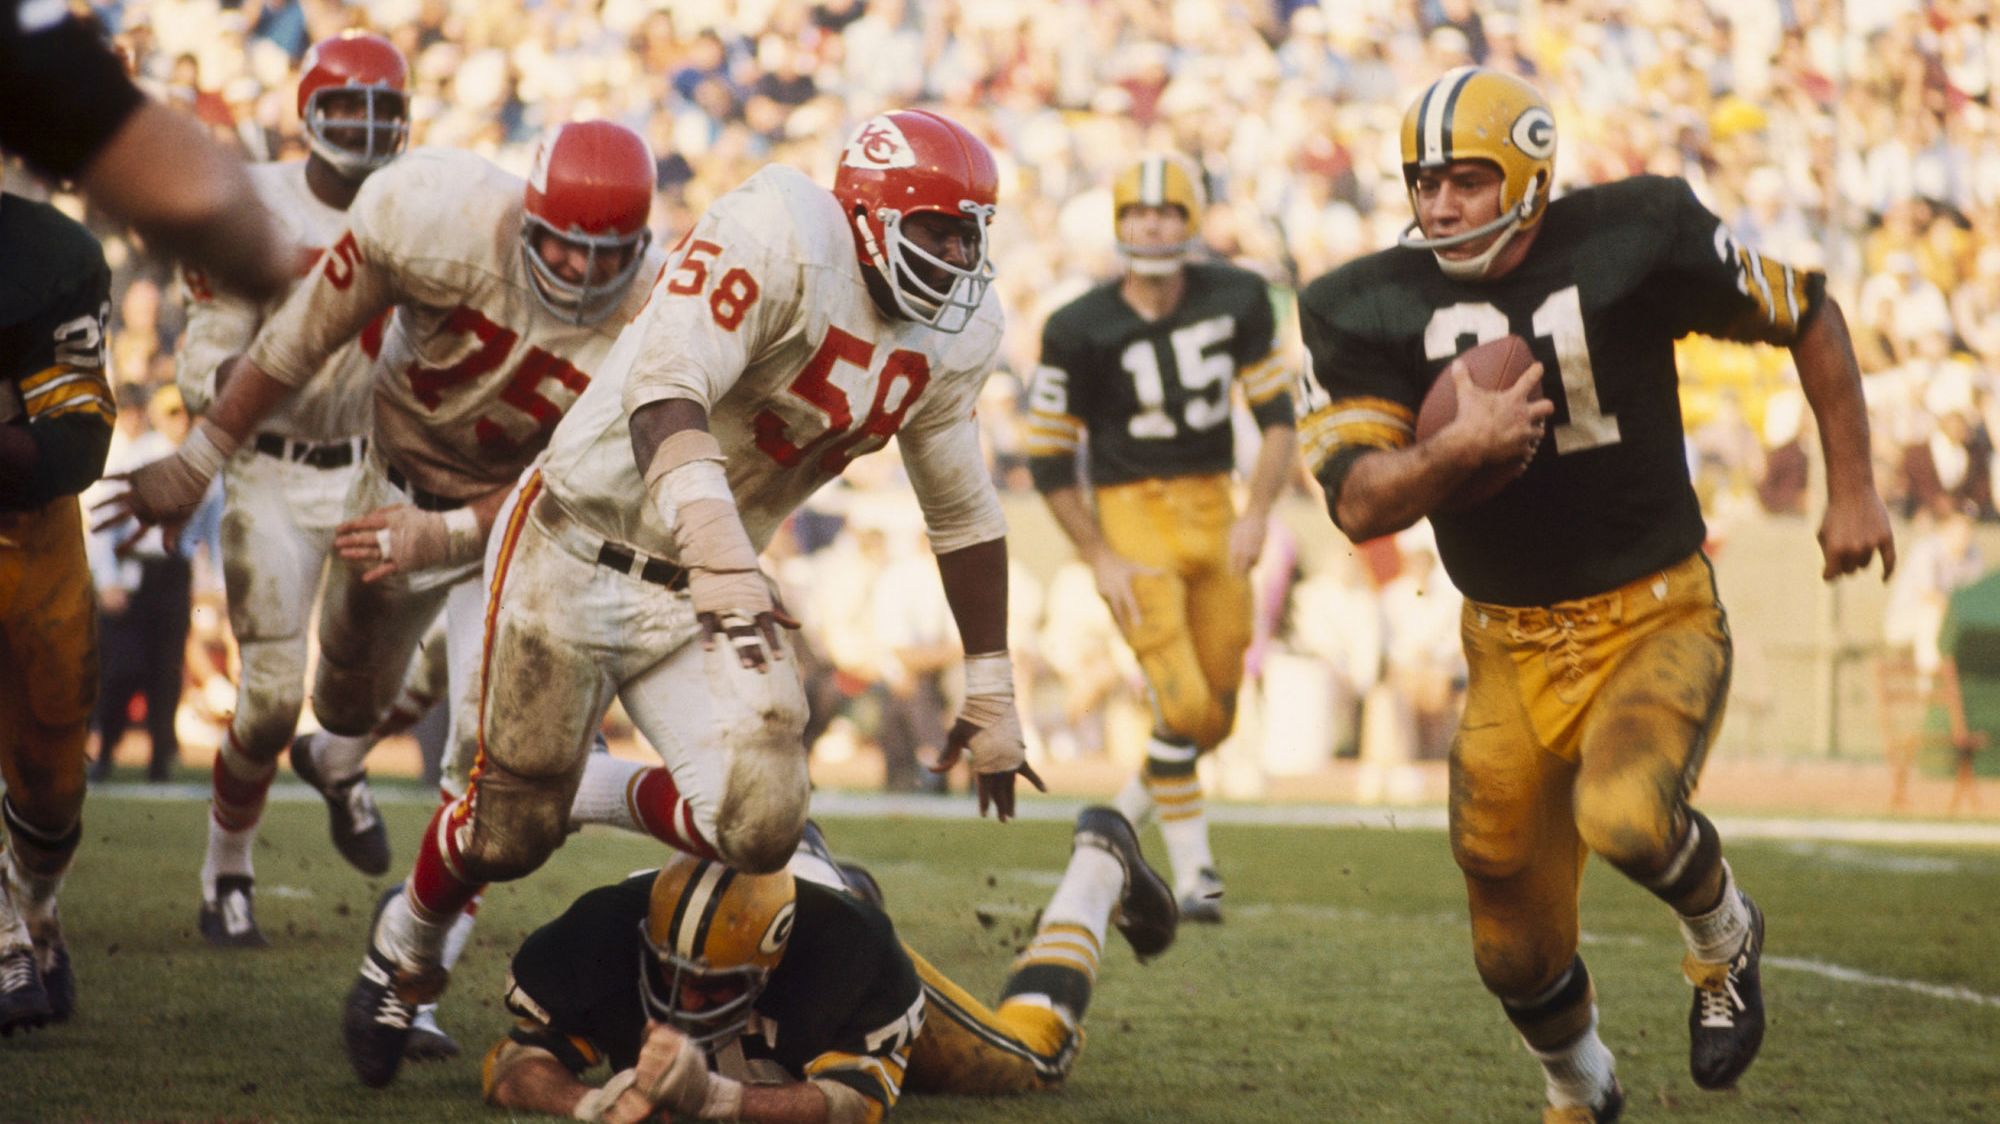 peave Net Cater Want to See the Original 1967 Super Bowl I Broadcast? A Kickstarter Could  Make It Happen | Mental Floss